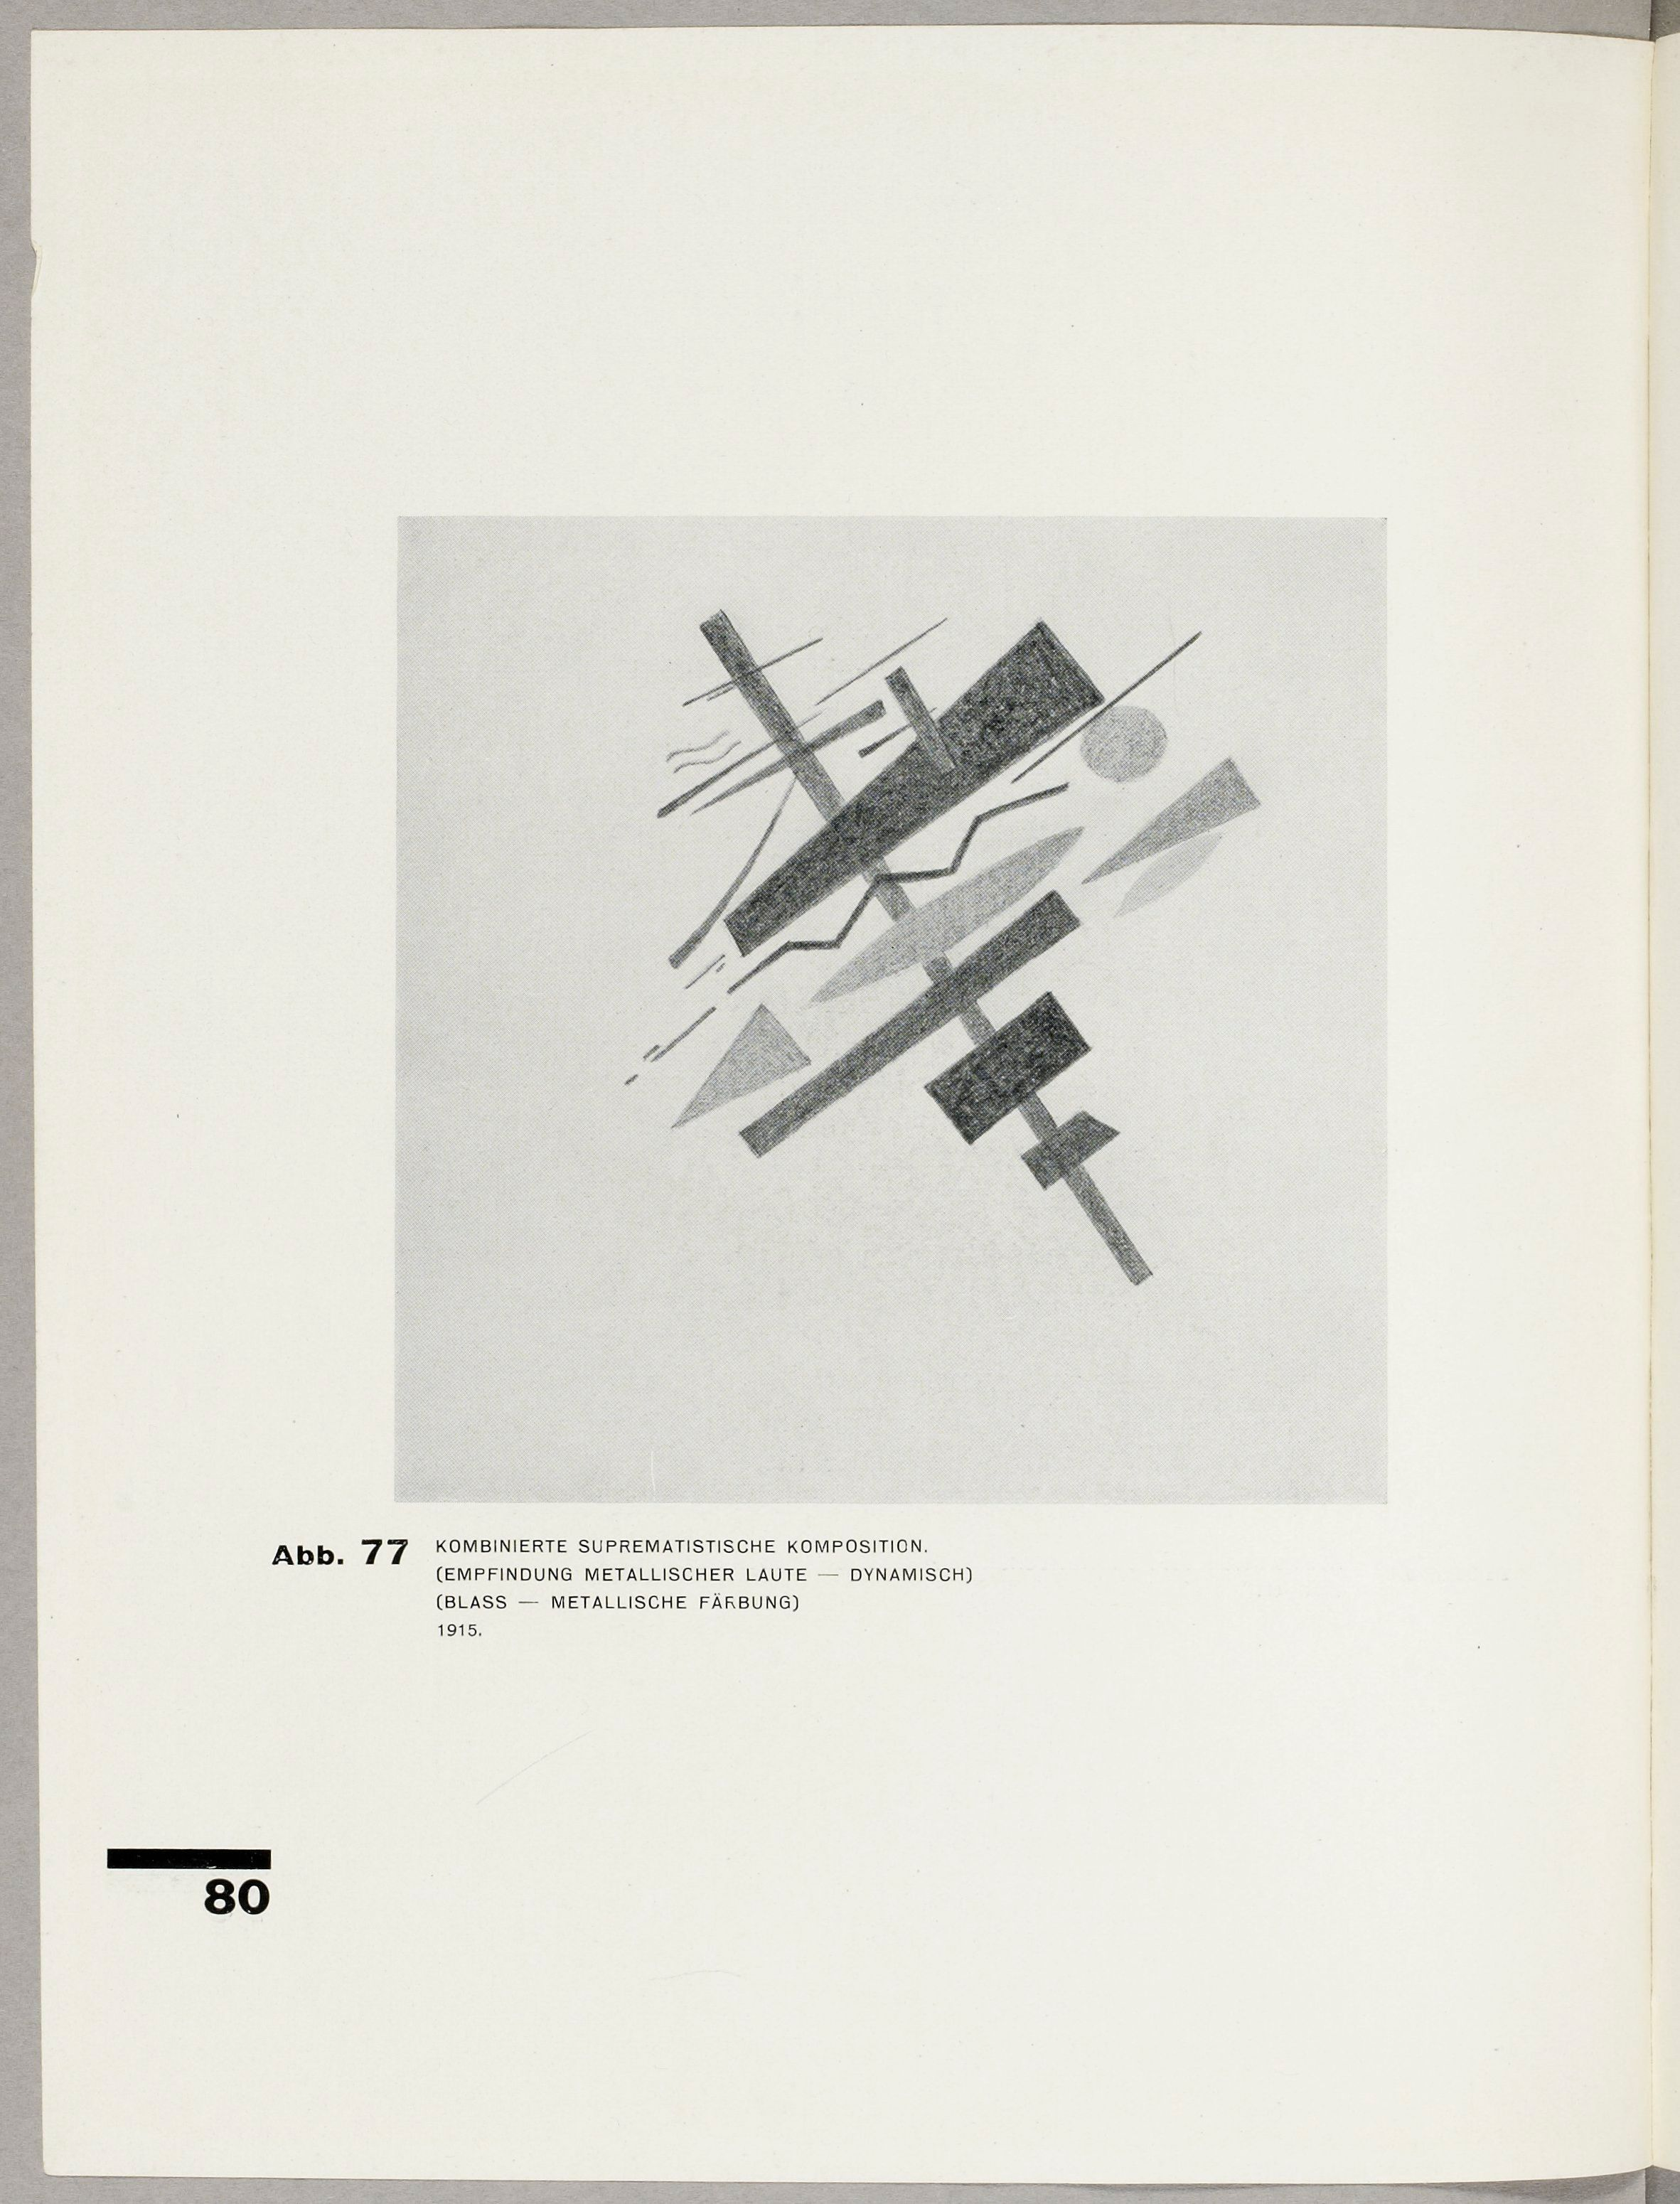 Combined Suprematistic Composition. (Feeling of Metallic Sounds - Dynamic) (Pale - Metallic Colour) (1927).